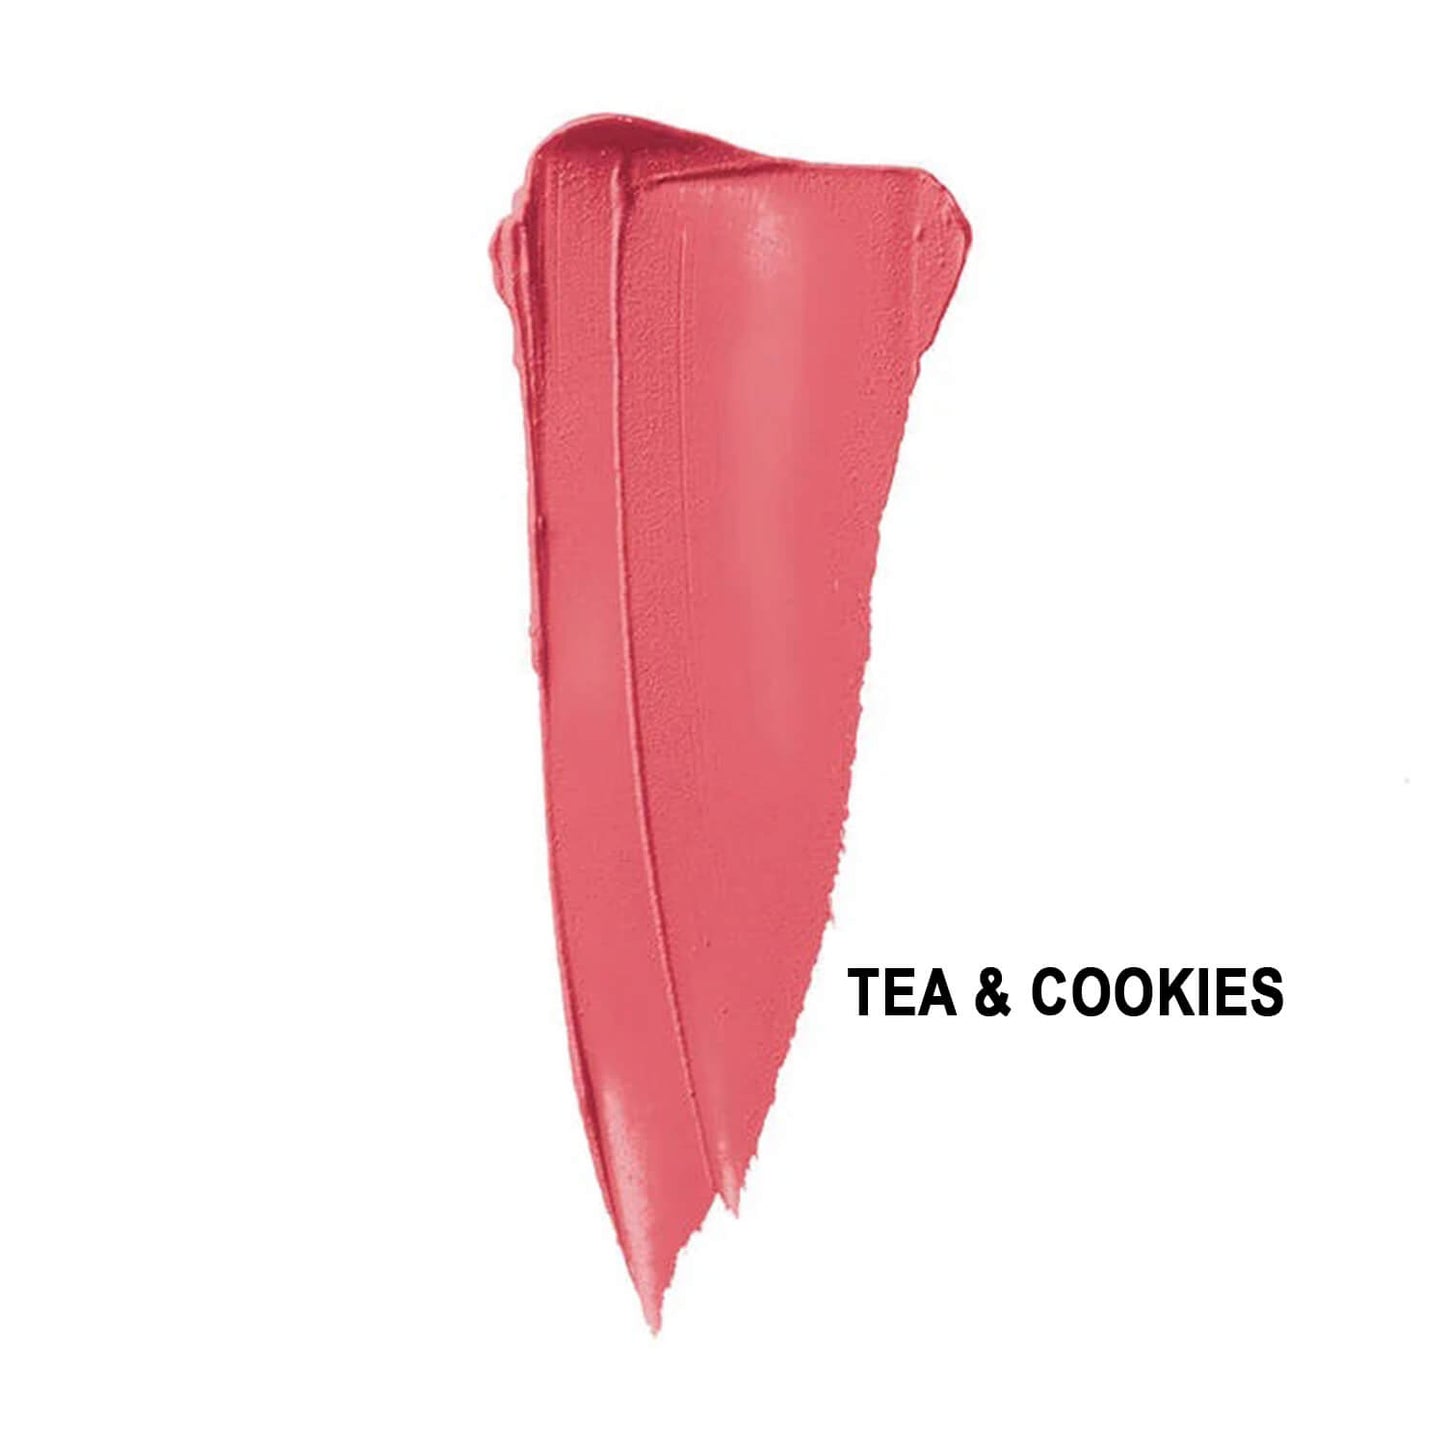 NYX Liquid Suede Cream Lipstick swatch of tea cookies available at Heygirl.pk for delivery in Pakistan